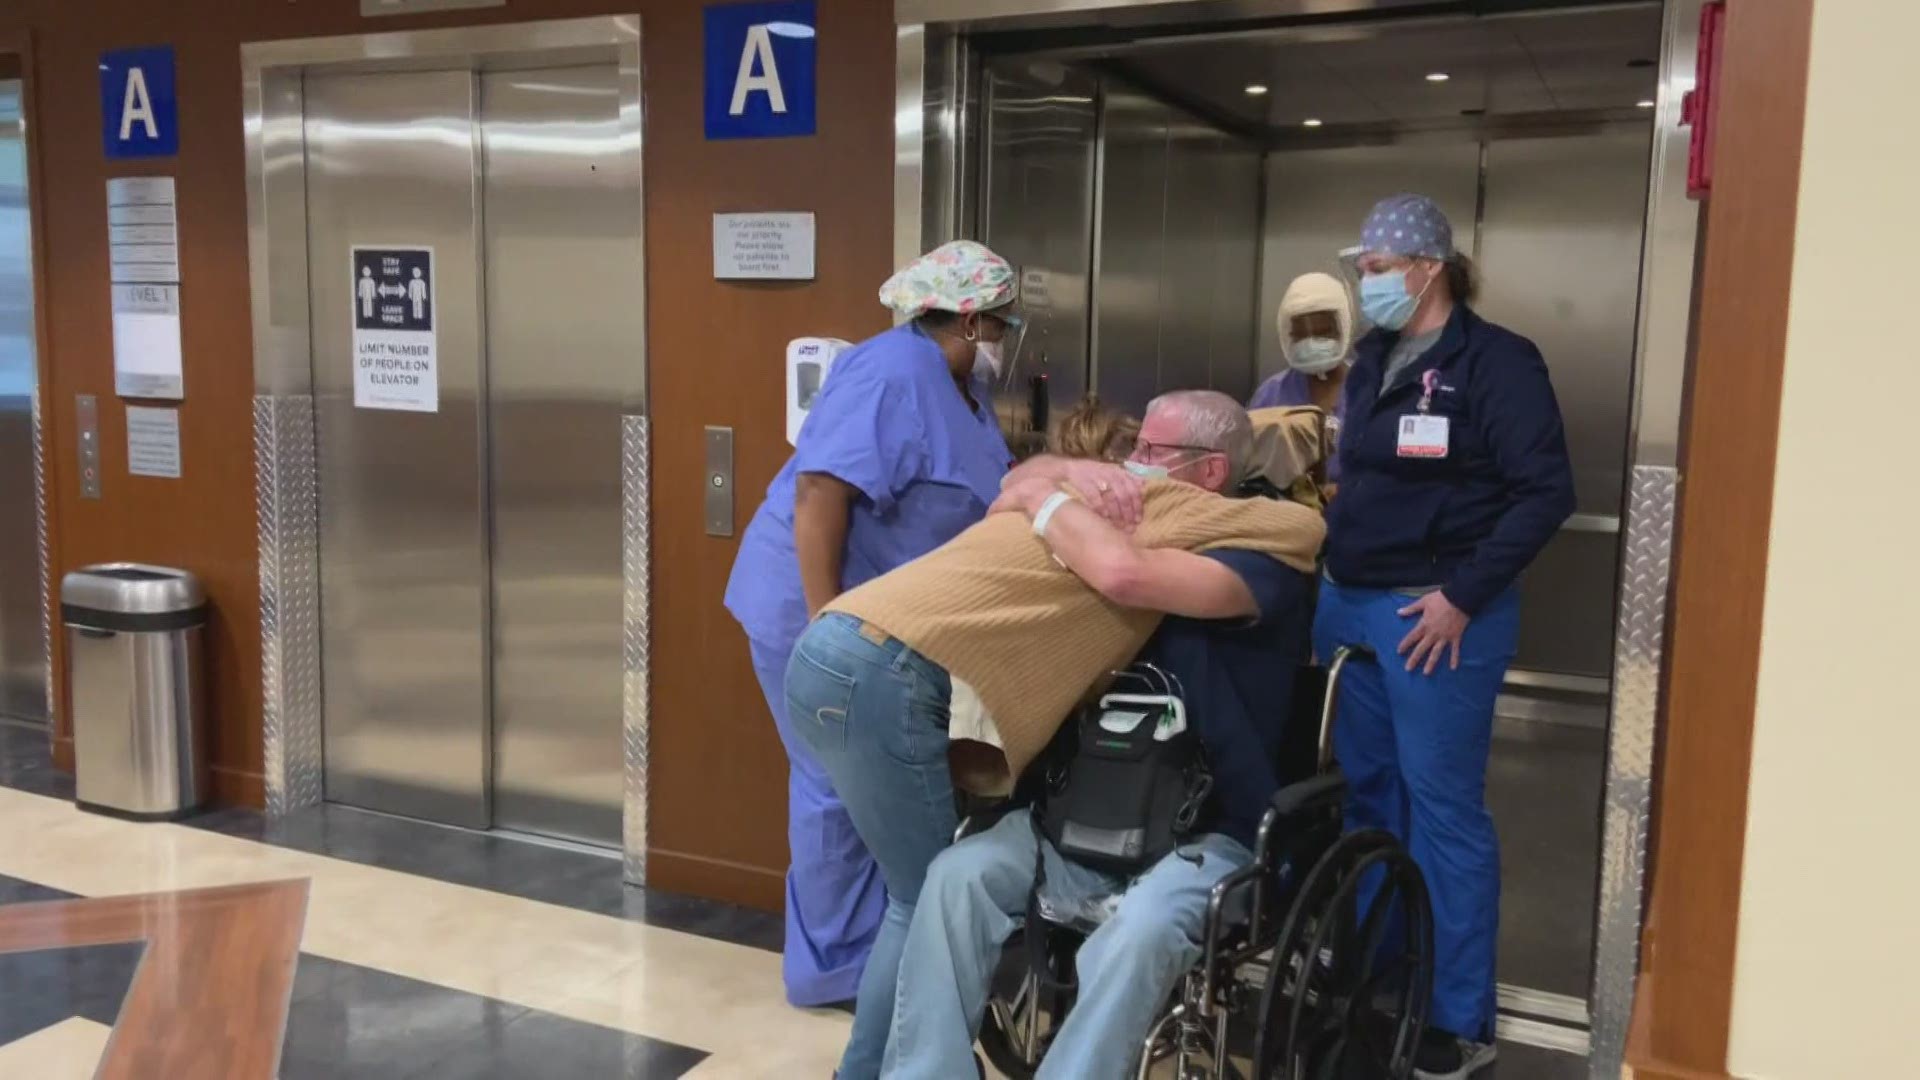 "Lean on your faith, lean on your family, and lean on your friends," said Rosemary Greif. Her husband came home after 16 long days at Medical City Plano.